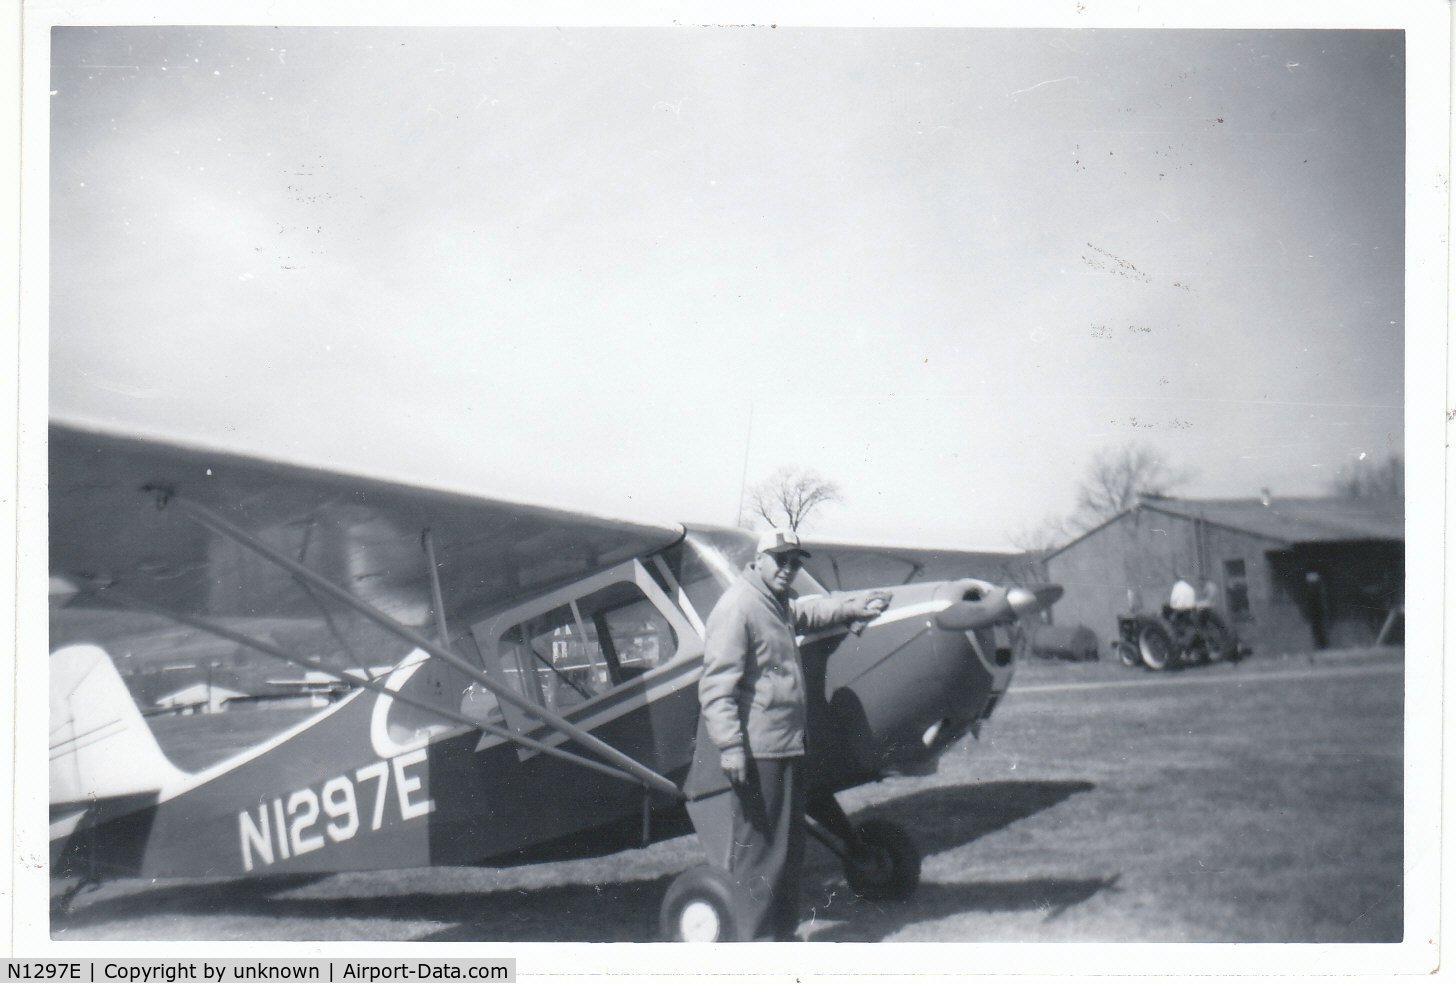 N1297E, 1946 Aeronca 7AC Champion C/N 7AC-4857, This was my Dad's plane back in the early 1960's my brother, myself and dad are in the picture - the photo was taken at an old airfield  called Brizee-Harmon field owned at the time by Roy Harmon on Marsh Rd. just outside Rochester, NY